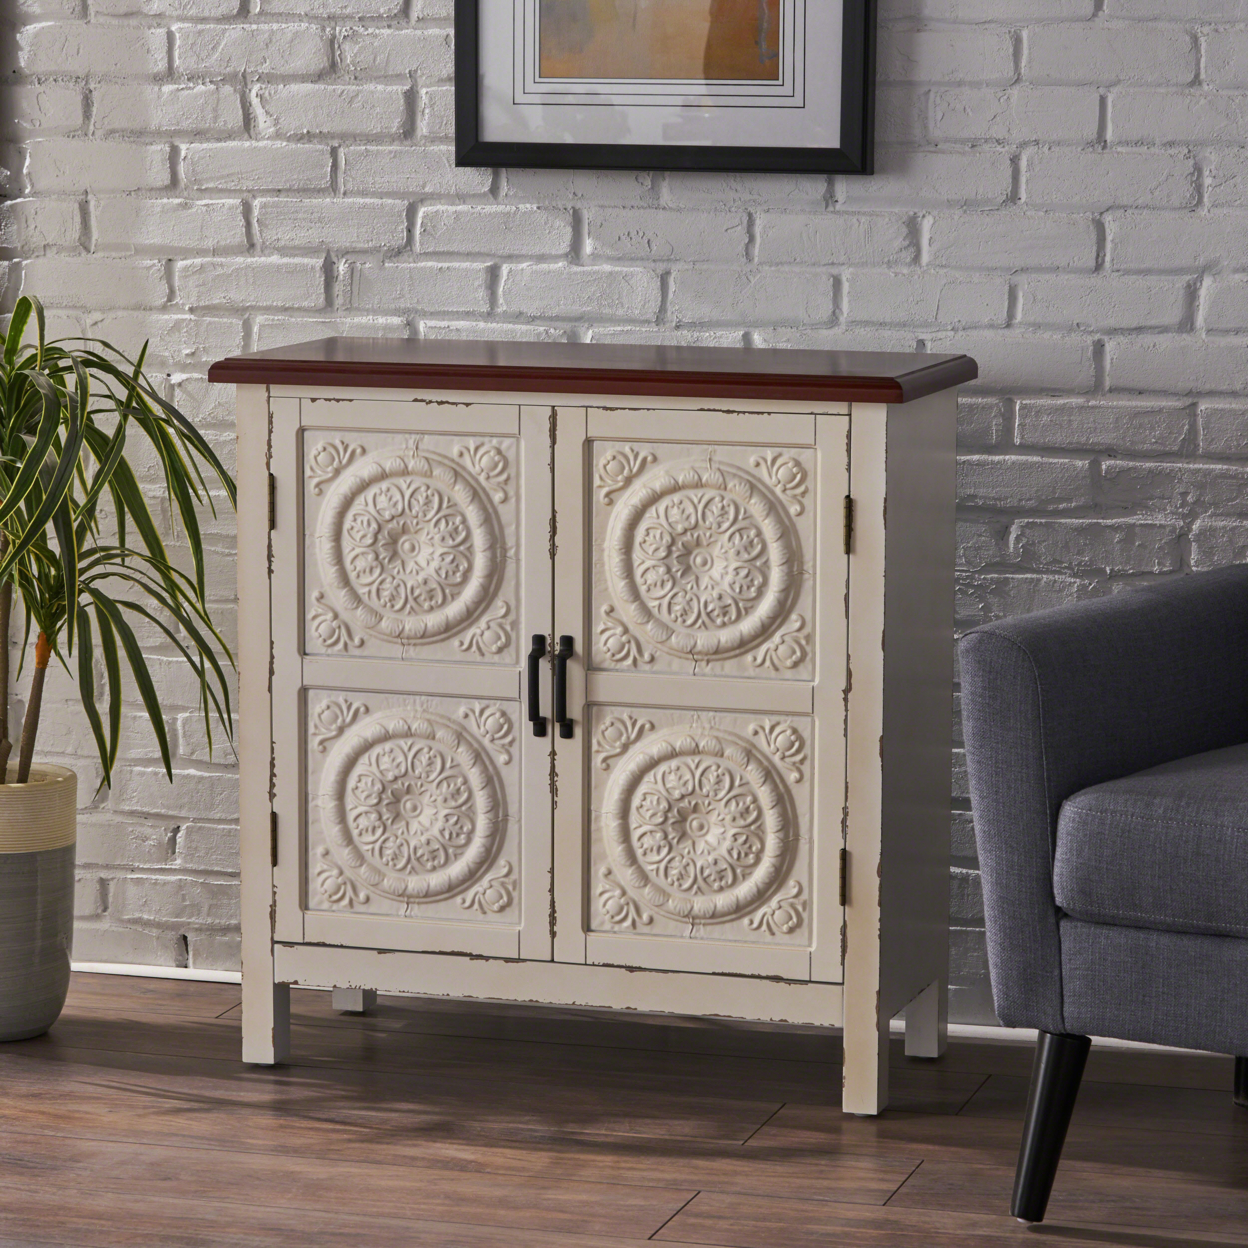 Aliana Finished Firwood Cabinet With Faux Wood Overlay And Accented Top - Distressed White/Brown